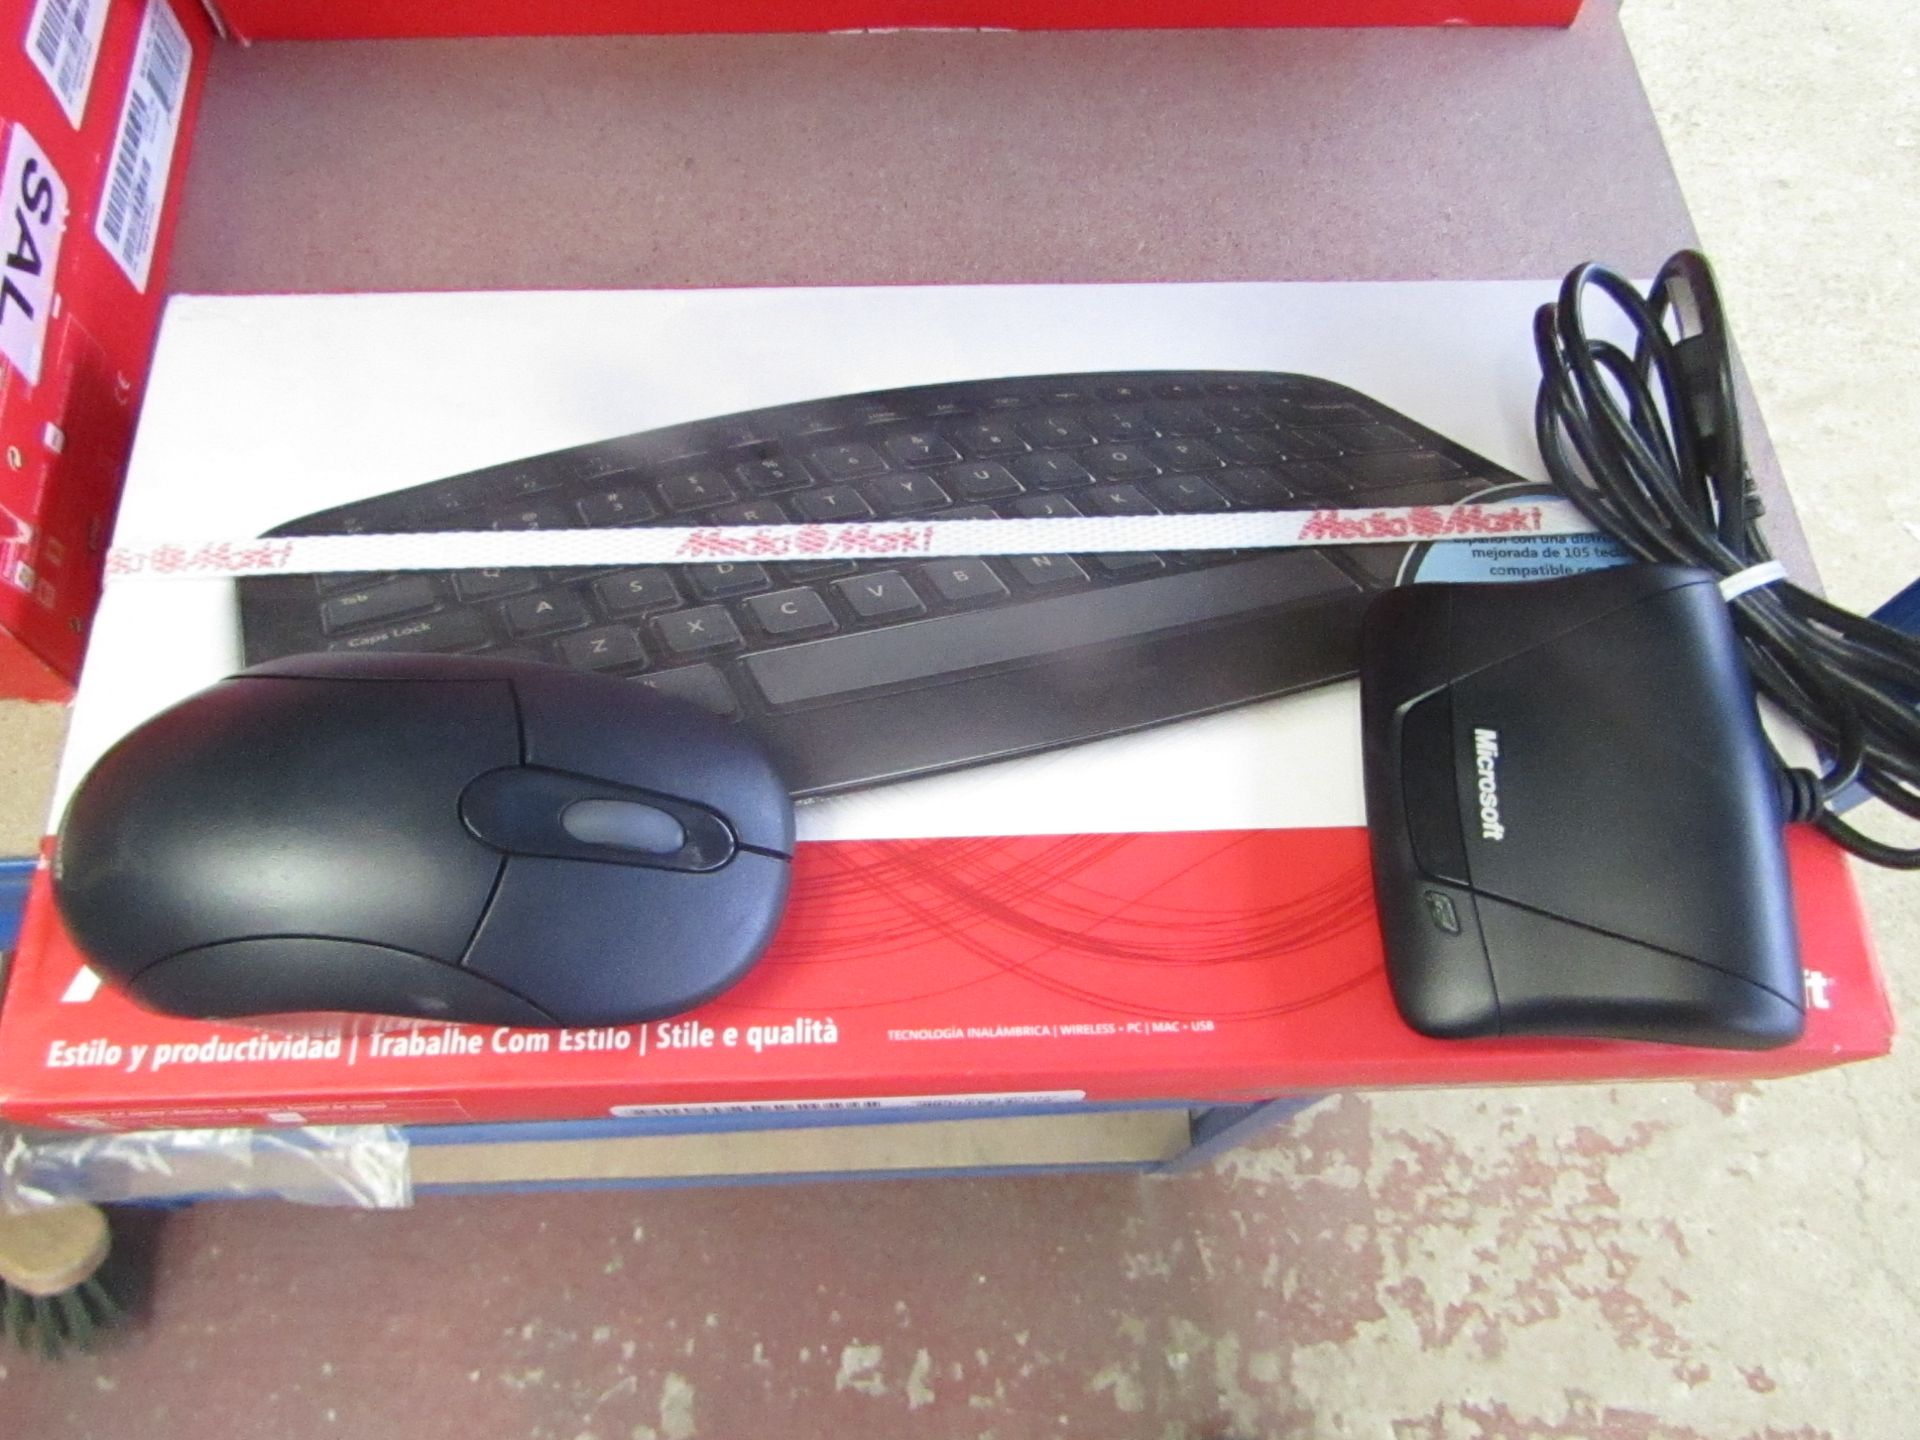 Microsoft arc keyboard, with a Microsoft wireless mouse, tested working and boxed.